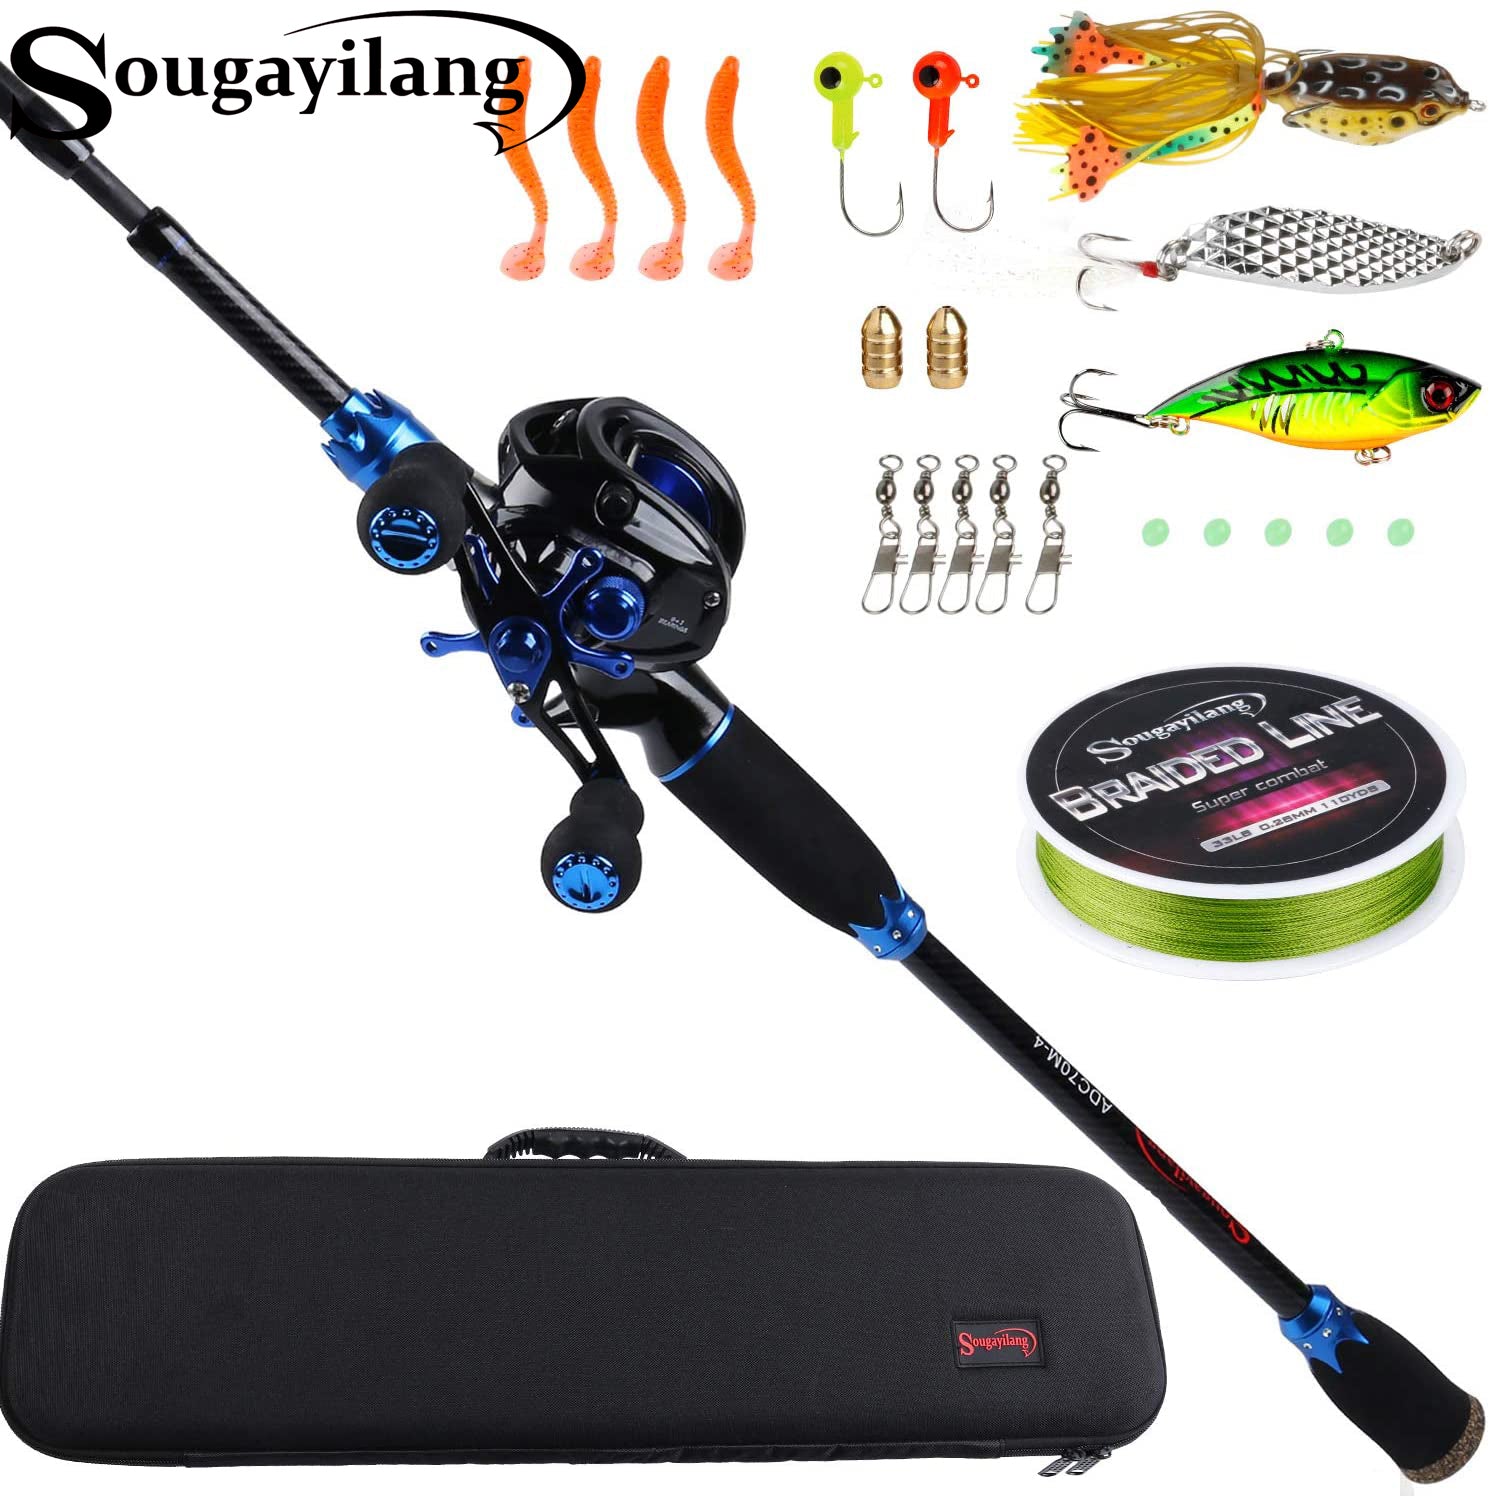 Sougayilang Telescopic Fishing Rod and Reel Combos Full Kit, Carbon Fiber  Fishing Pole, 13 +1 Shielded Bearings Stainless Steel BB Spinning Reel with